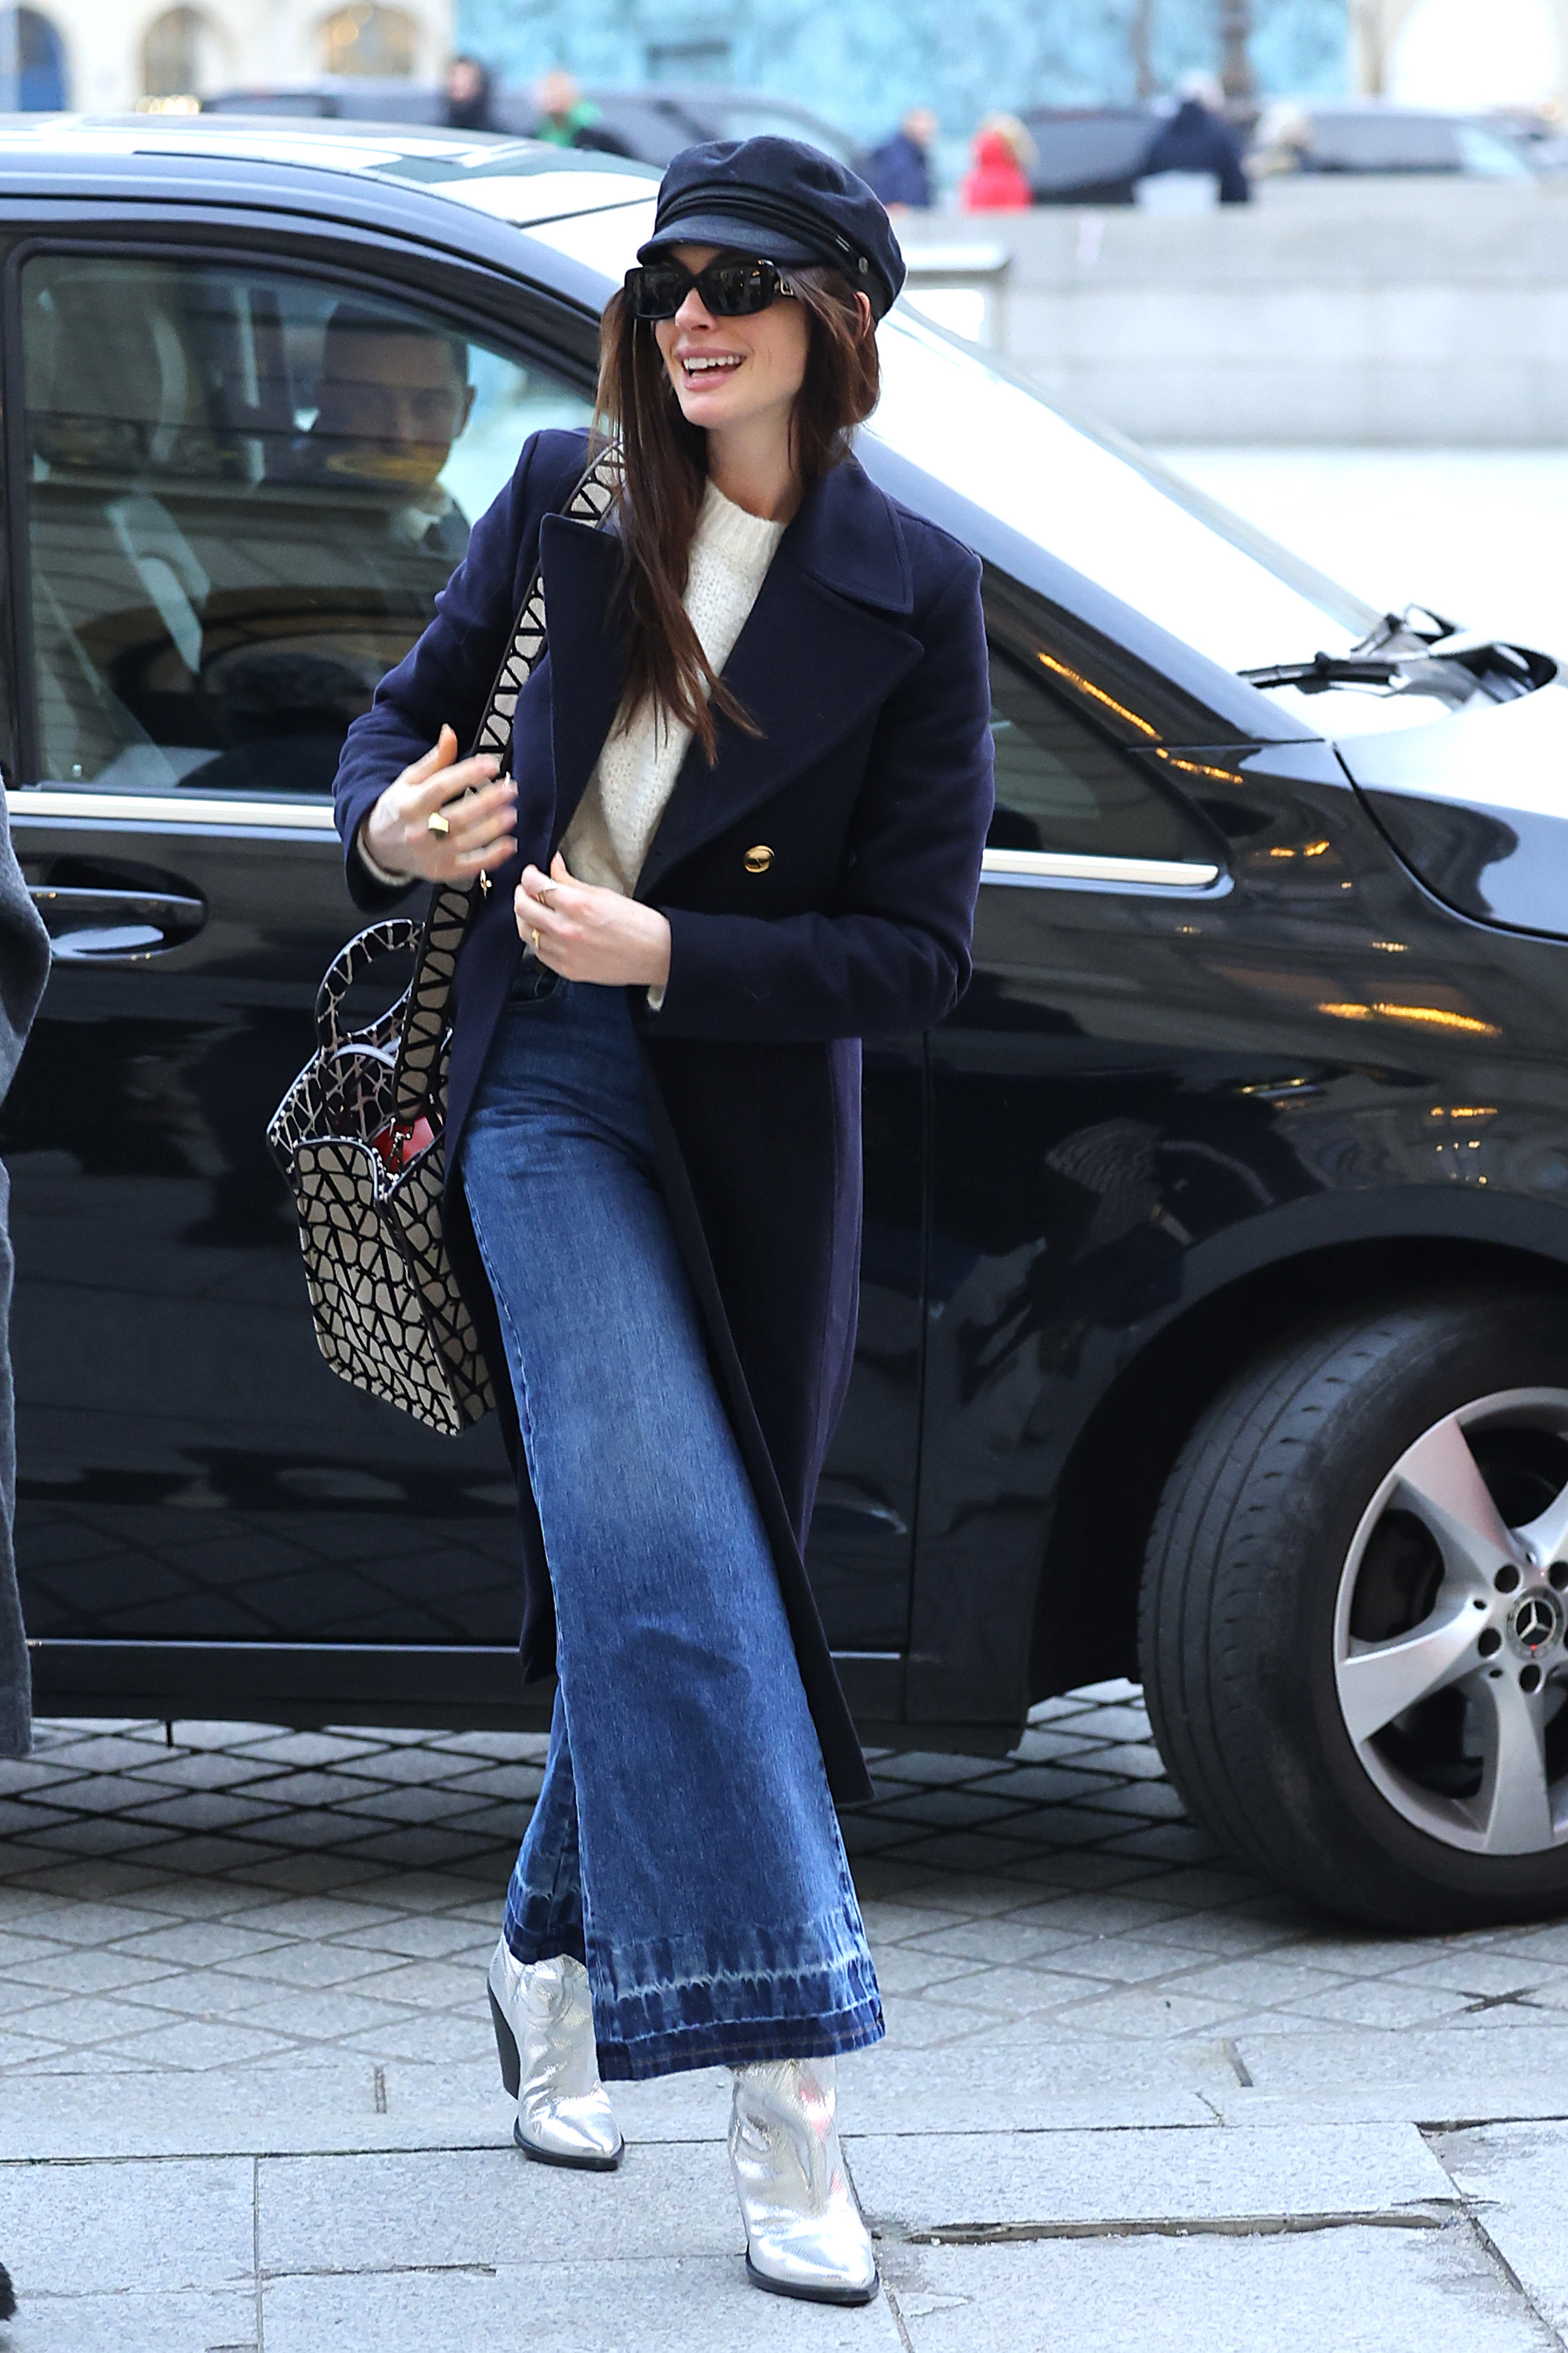 Anne Hathaway in a navy coat, white top, flared jeans, and silver boots steps out of a car